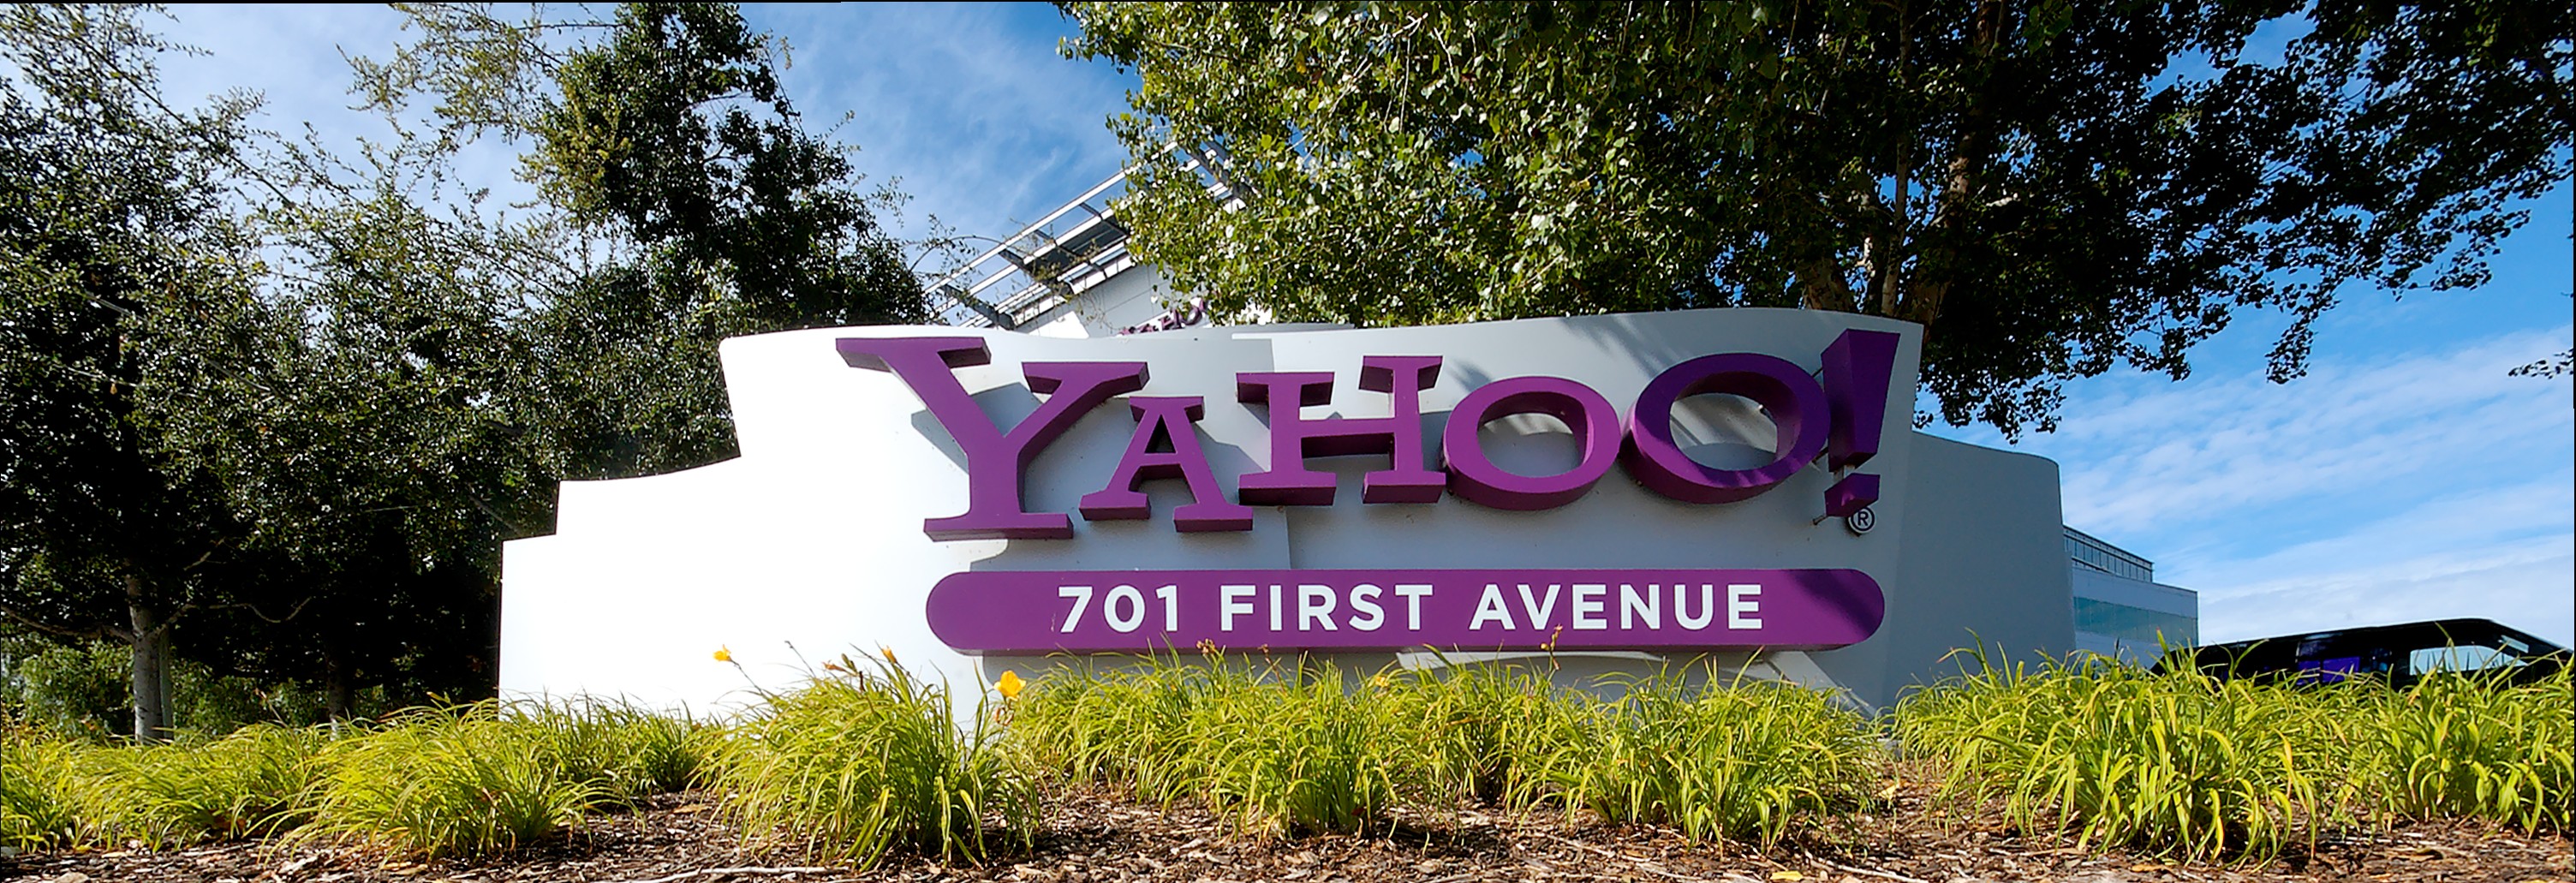 Federal judge rejects settlement for Yahoo privacy breach